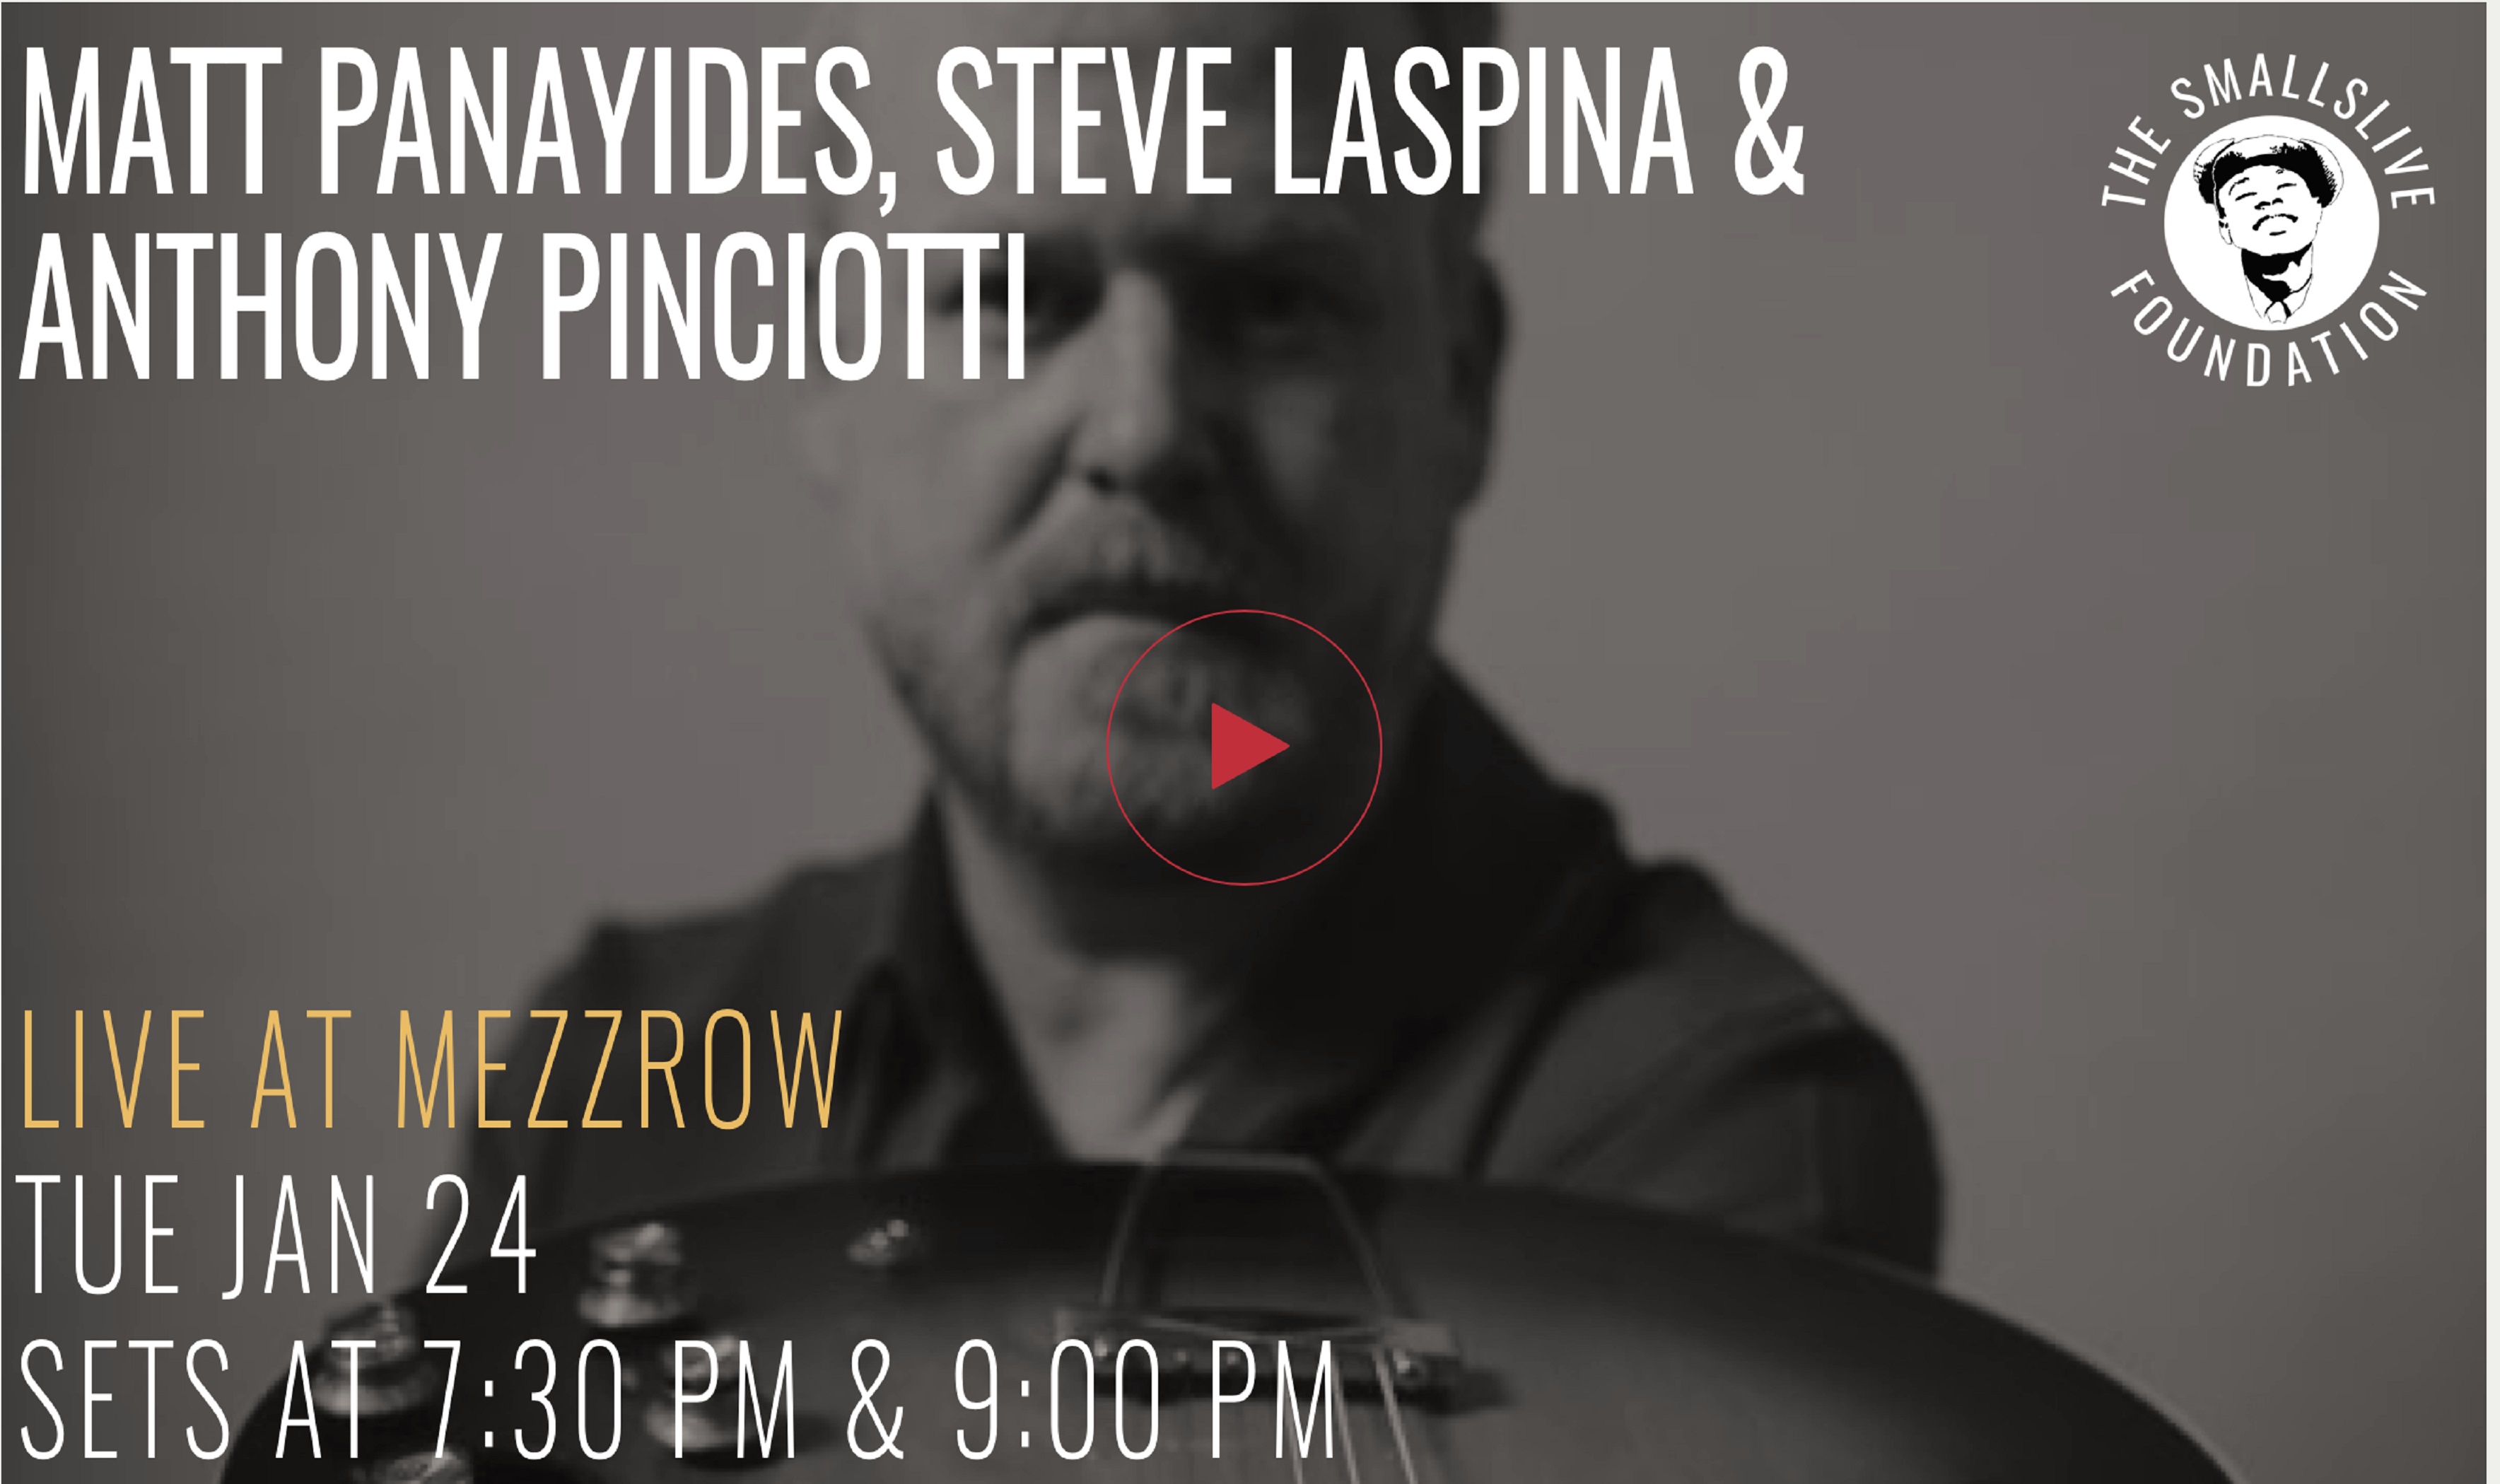 Matt Panayides set to play shows @ Mezzrow in NYC - 1/24/23